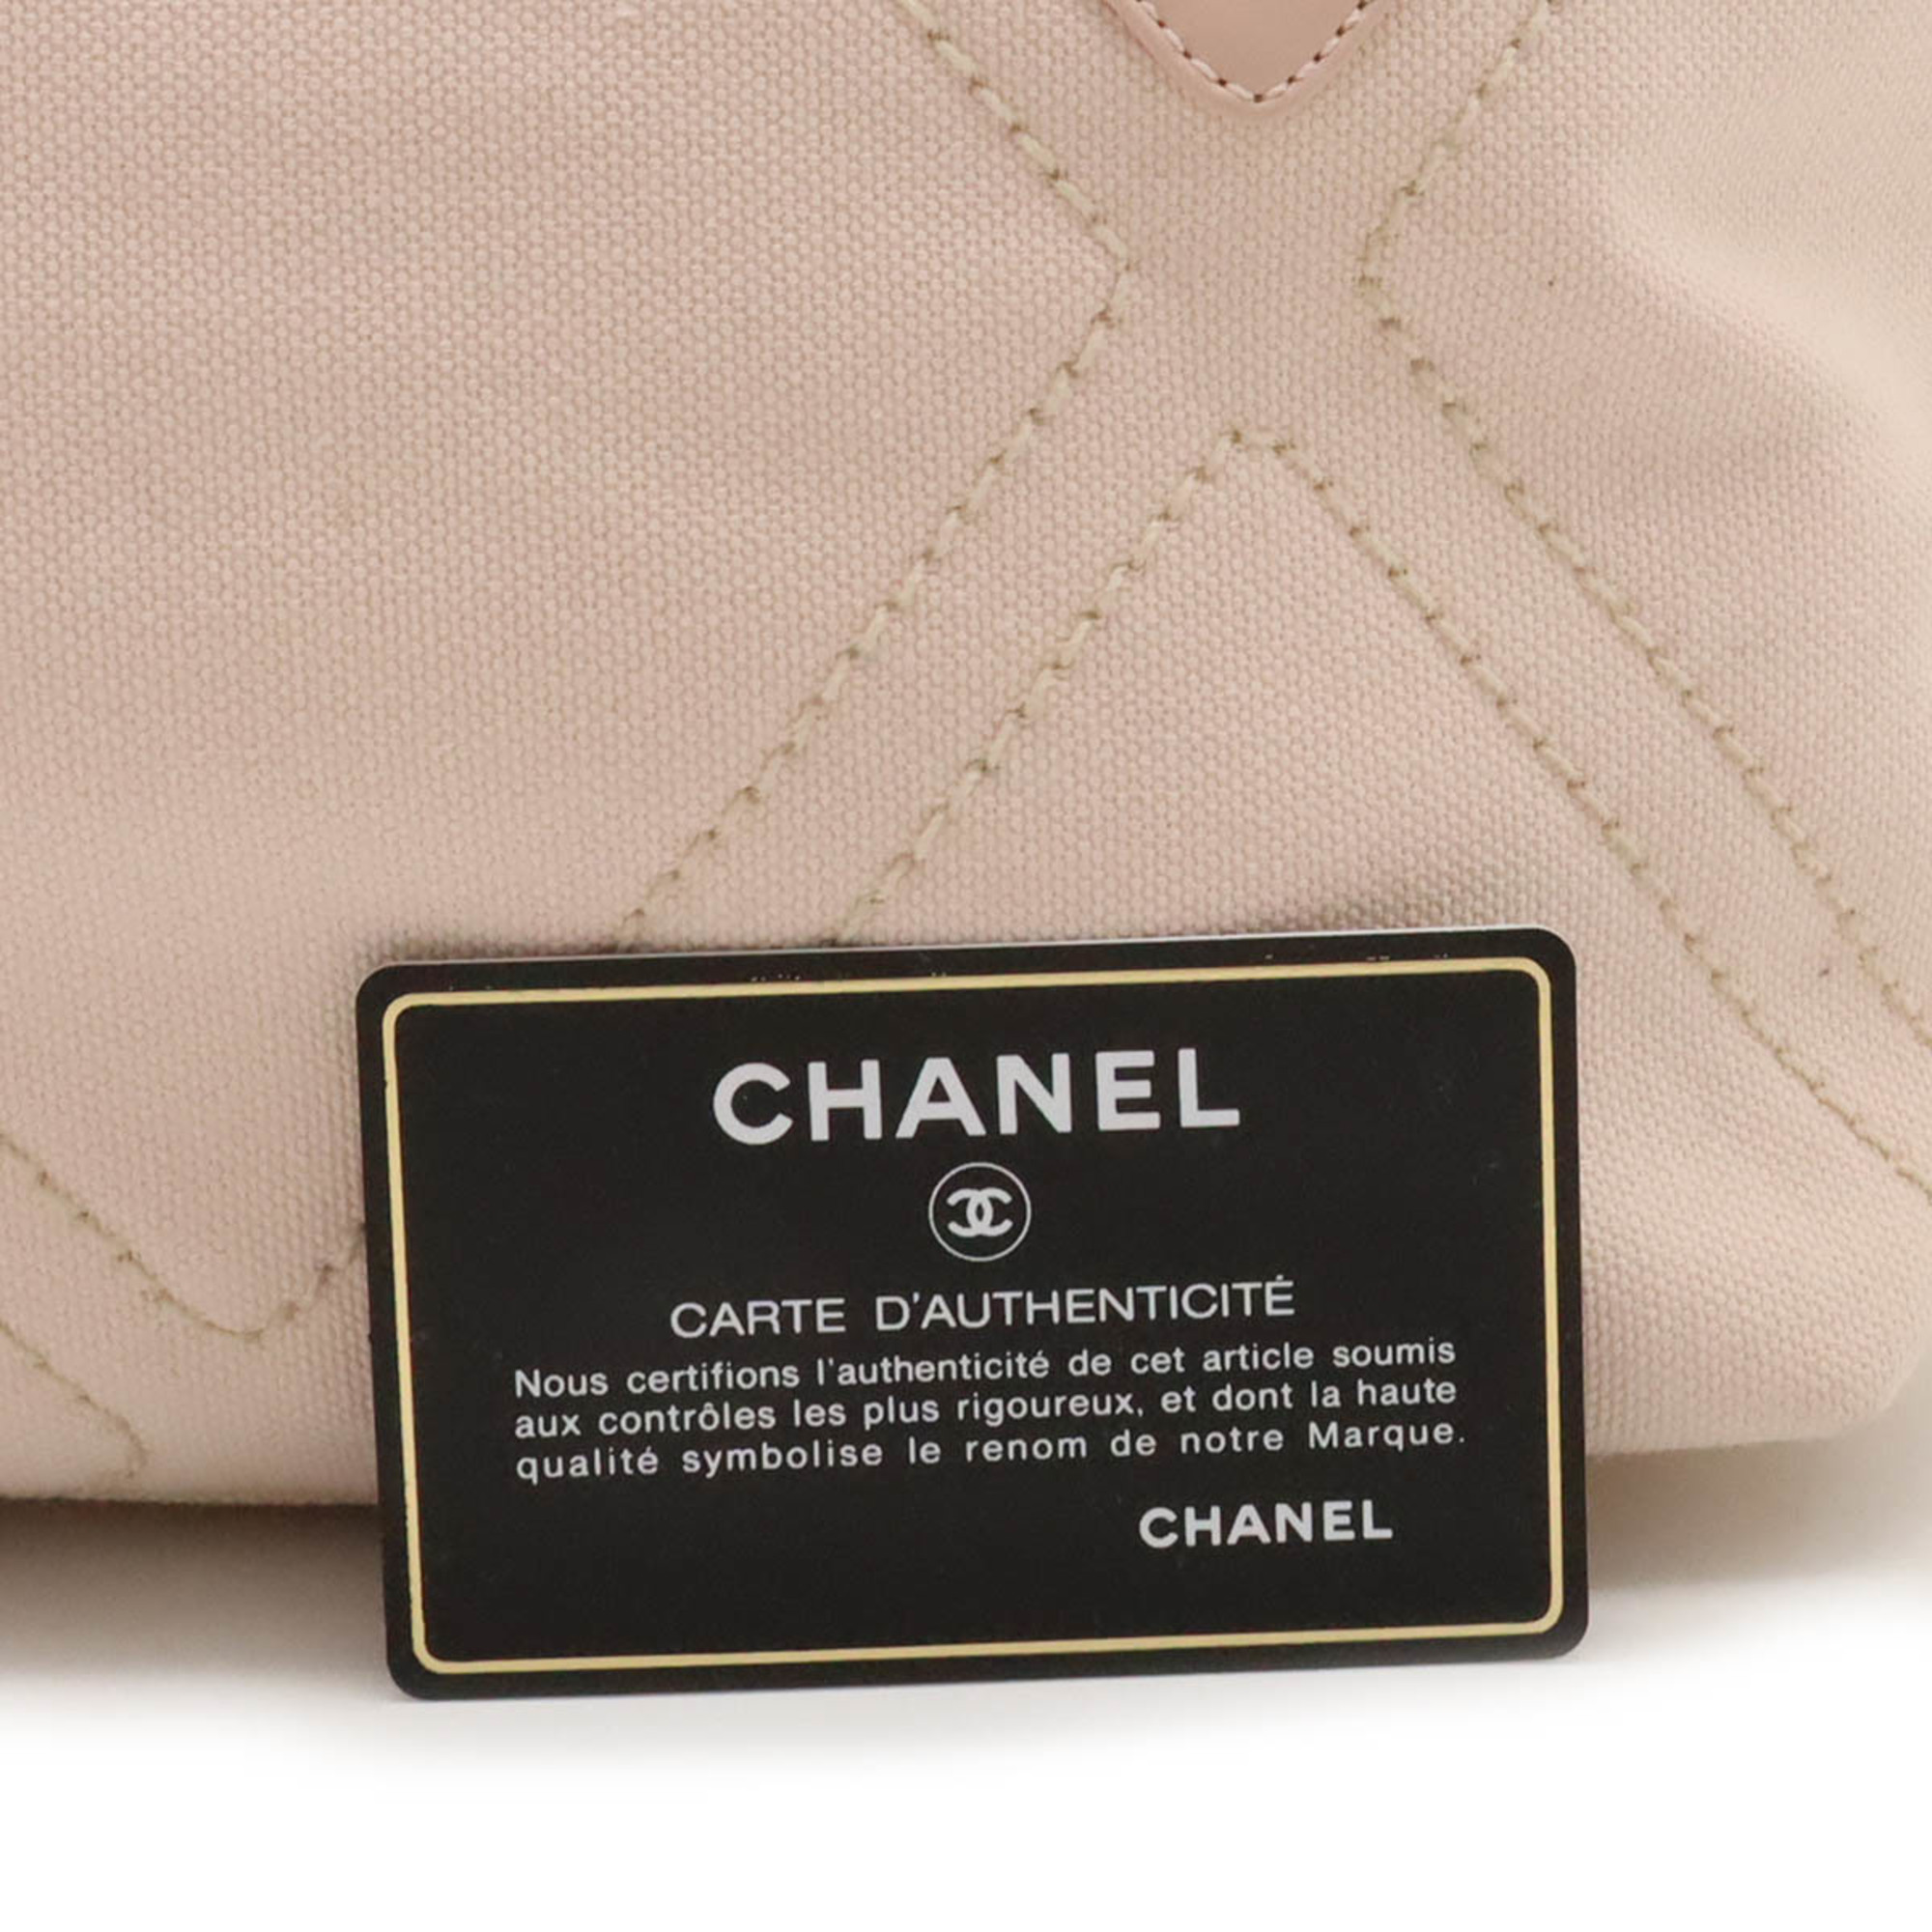 CHANEL No.5 Coco Mark Rope Tote Bag Shoulder Canvas Leather Light Pink A27208